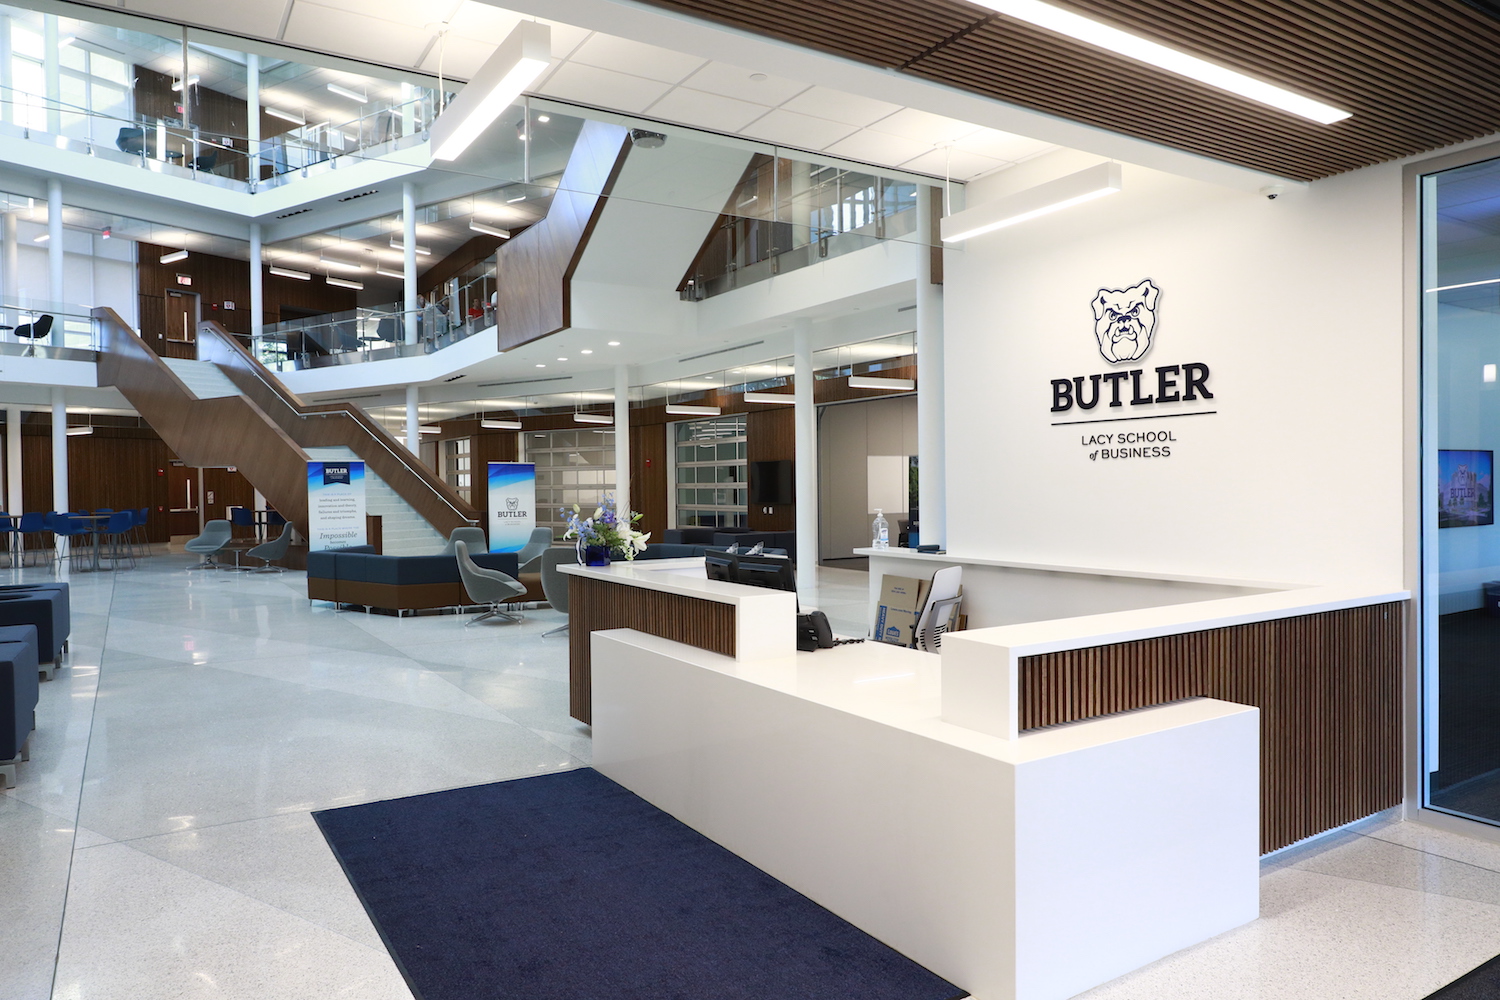 Butler University Names Bill And Joanne Dugan Hall In Recognition Of 7 Million Gift From Butler